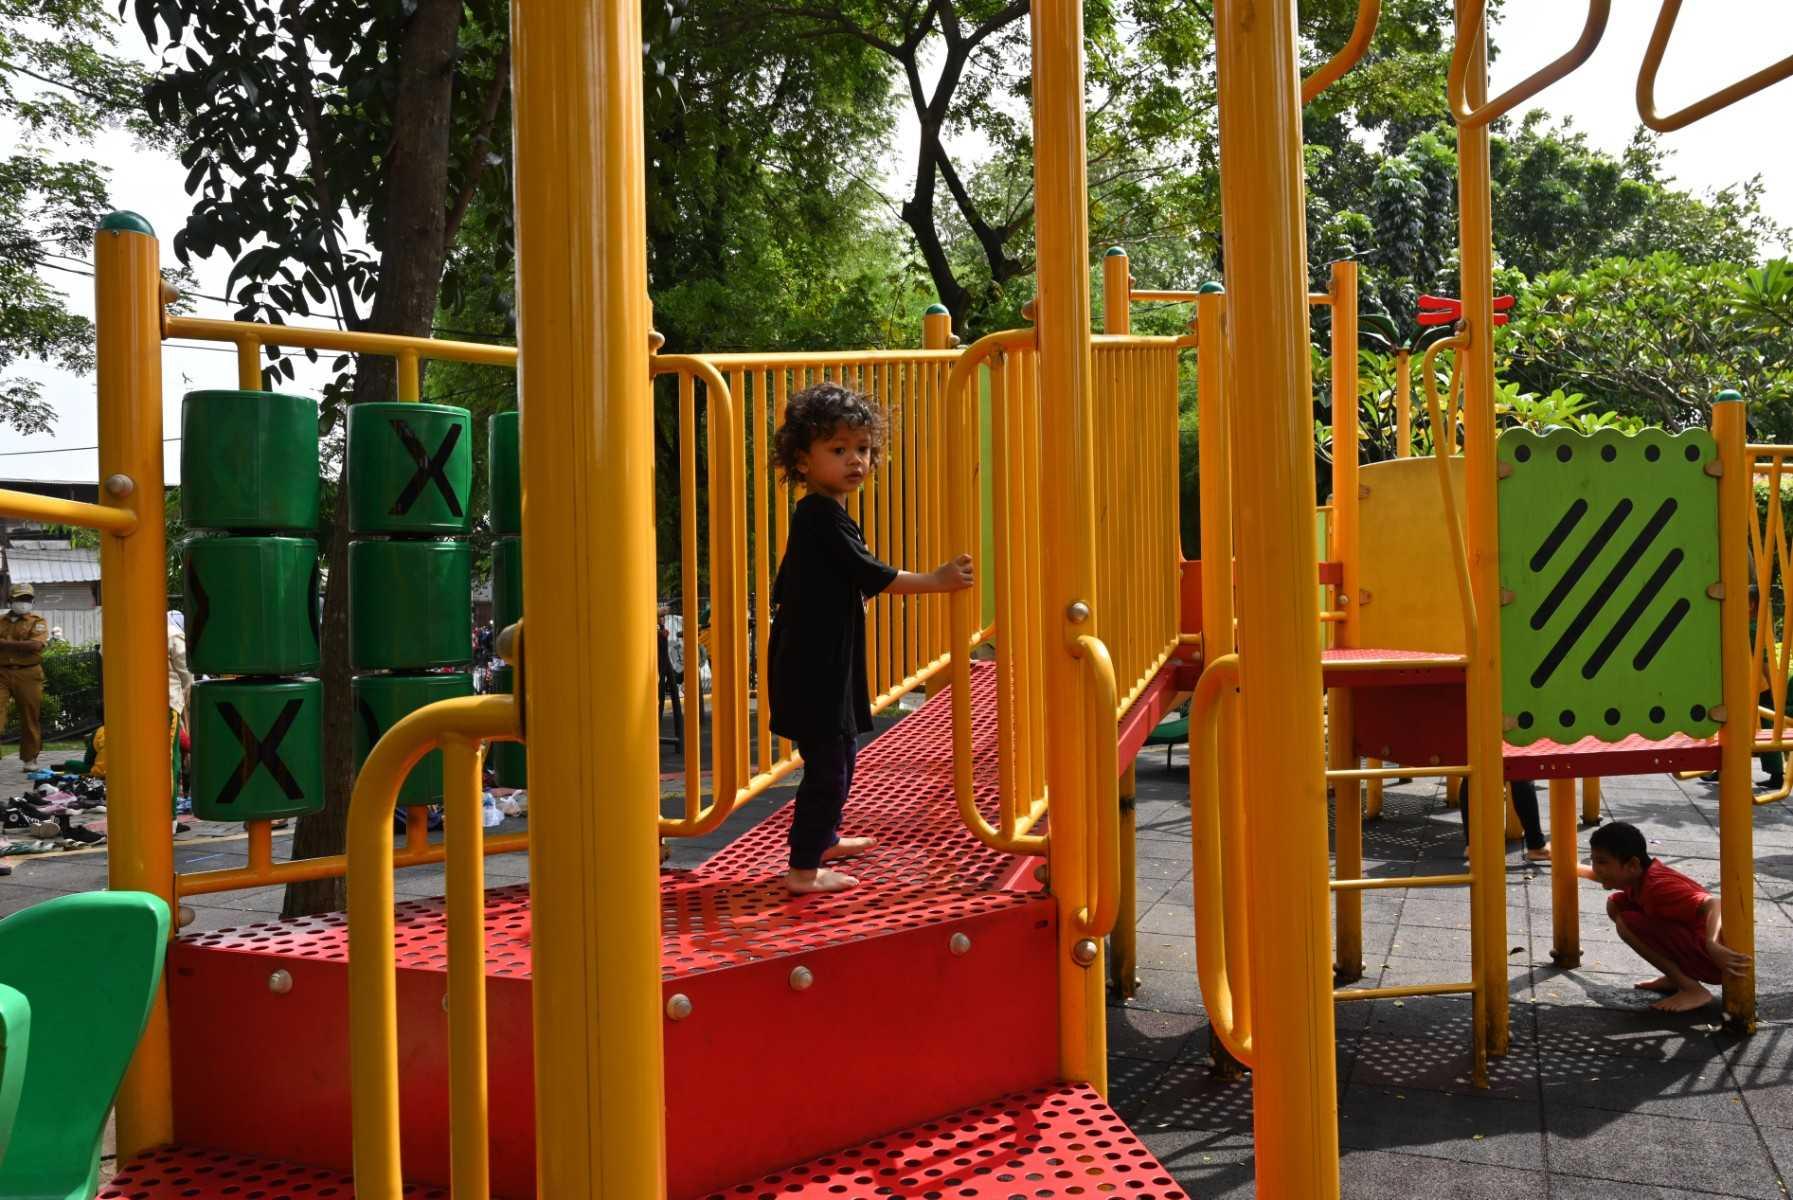 Children play at a playground in Jakarta, Indonesia, on March 29. Photo: AFP